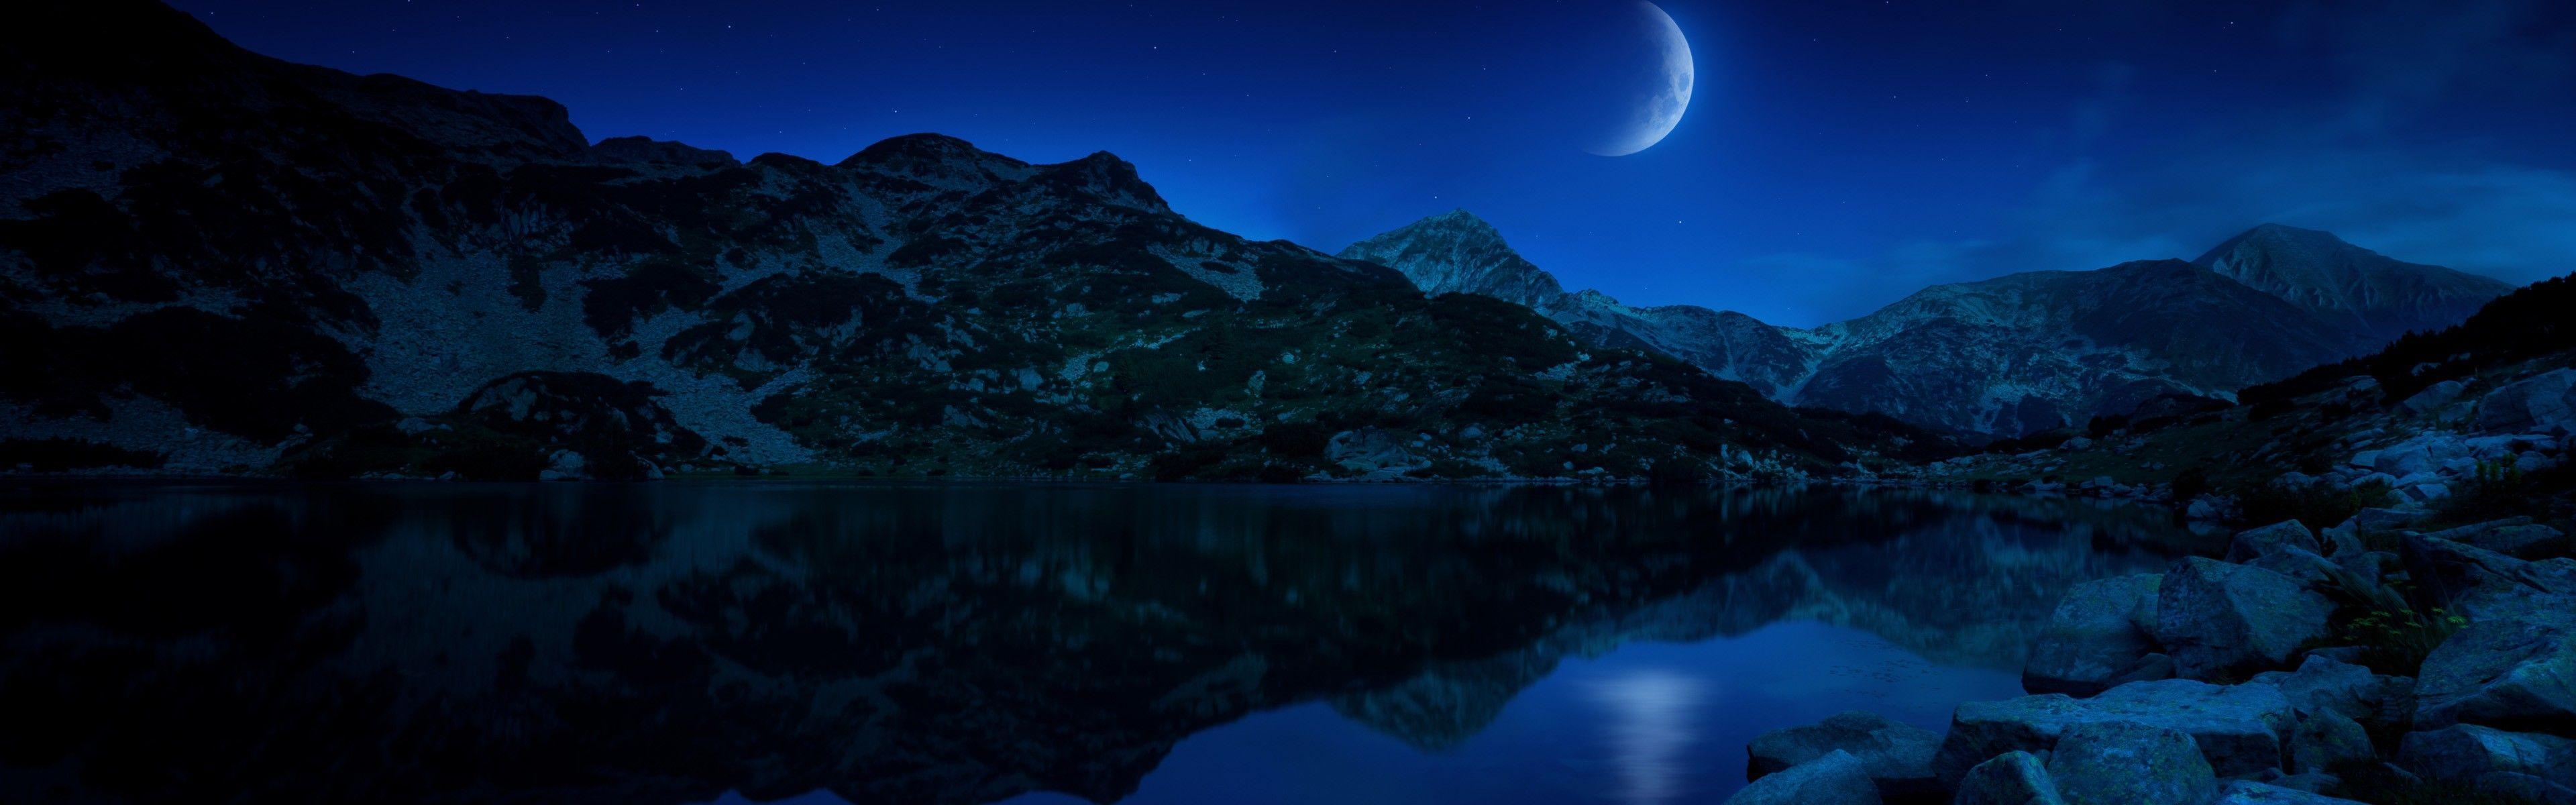 Night Time Backgrounds Windows 1.0